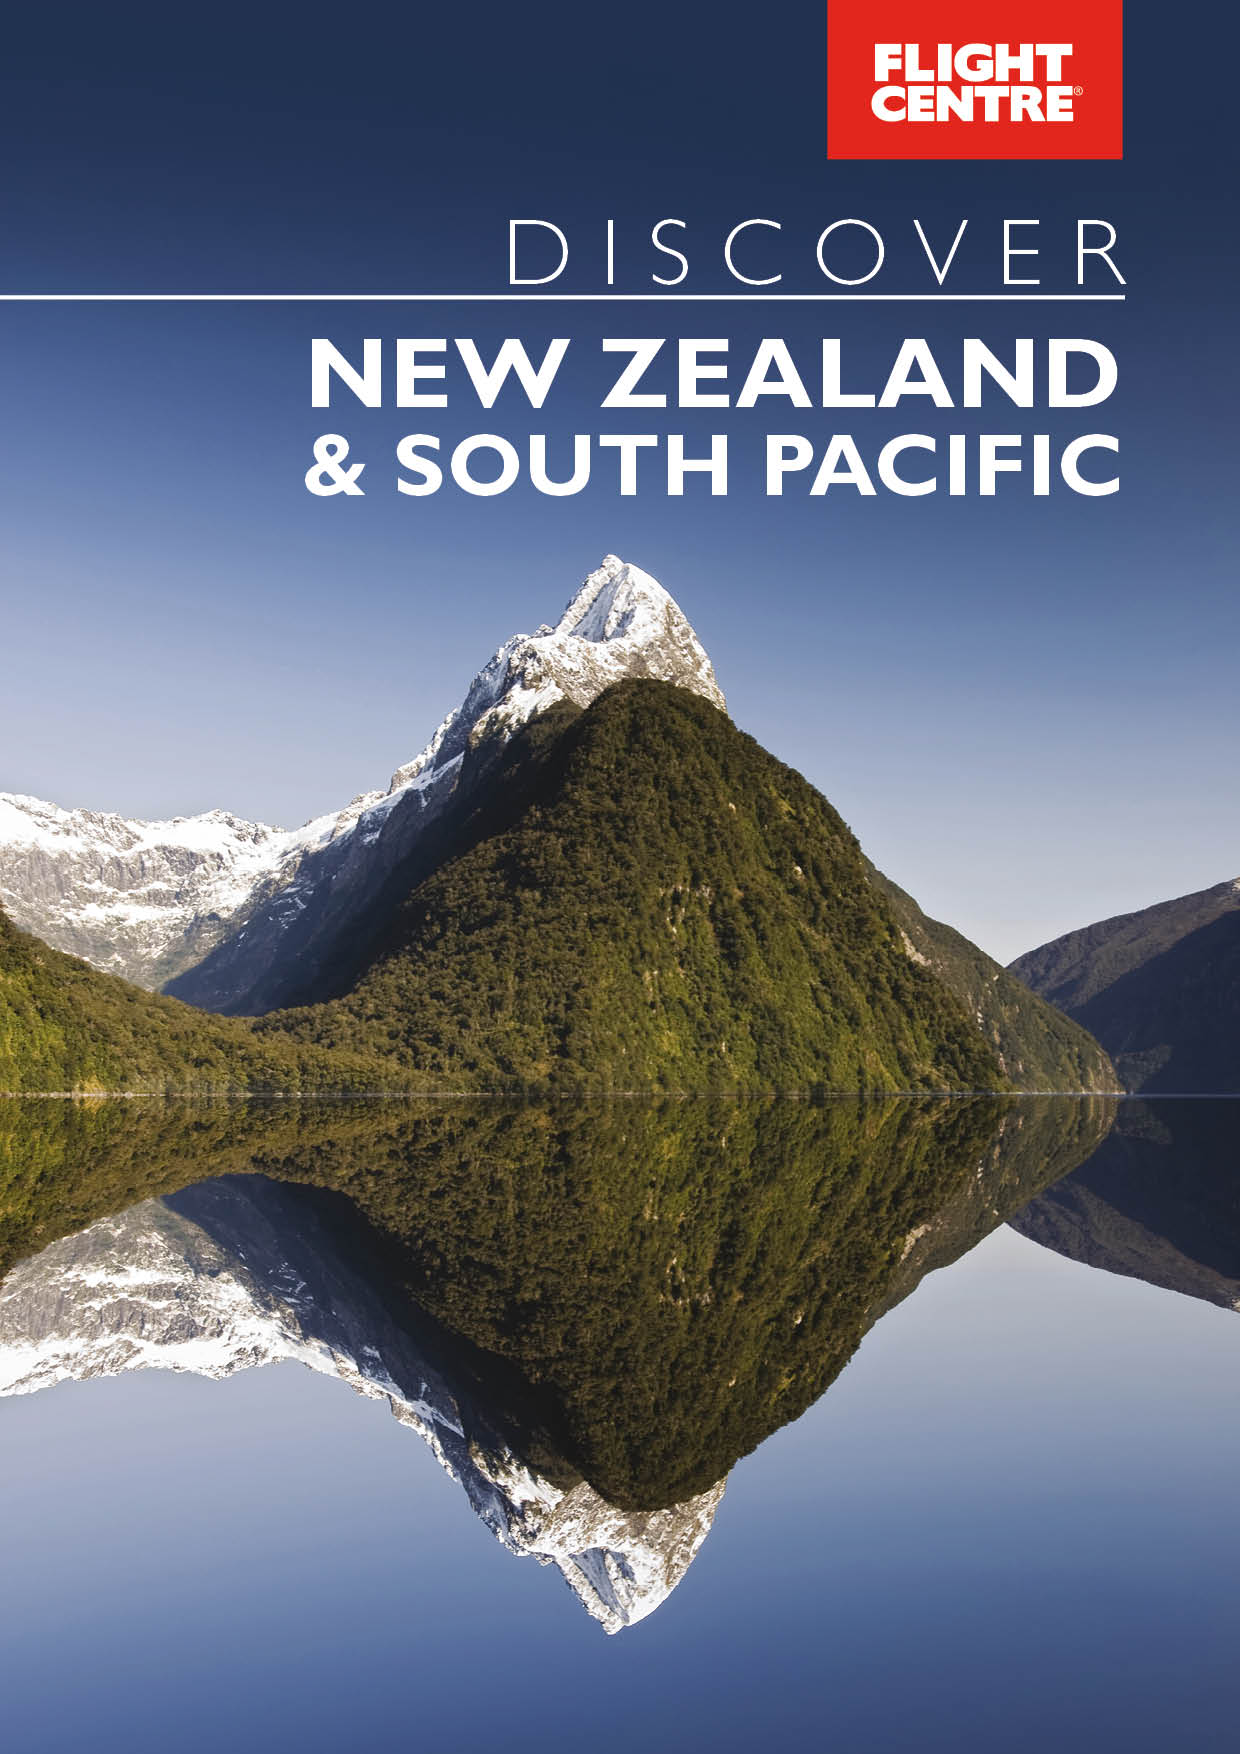 New Zealand and South Pacific brochure